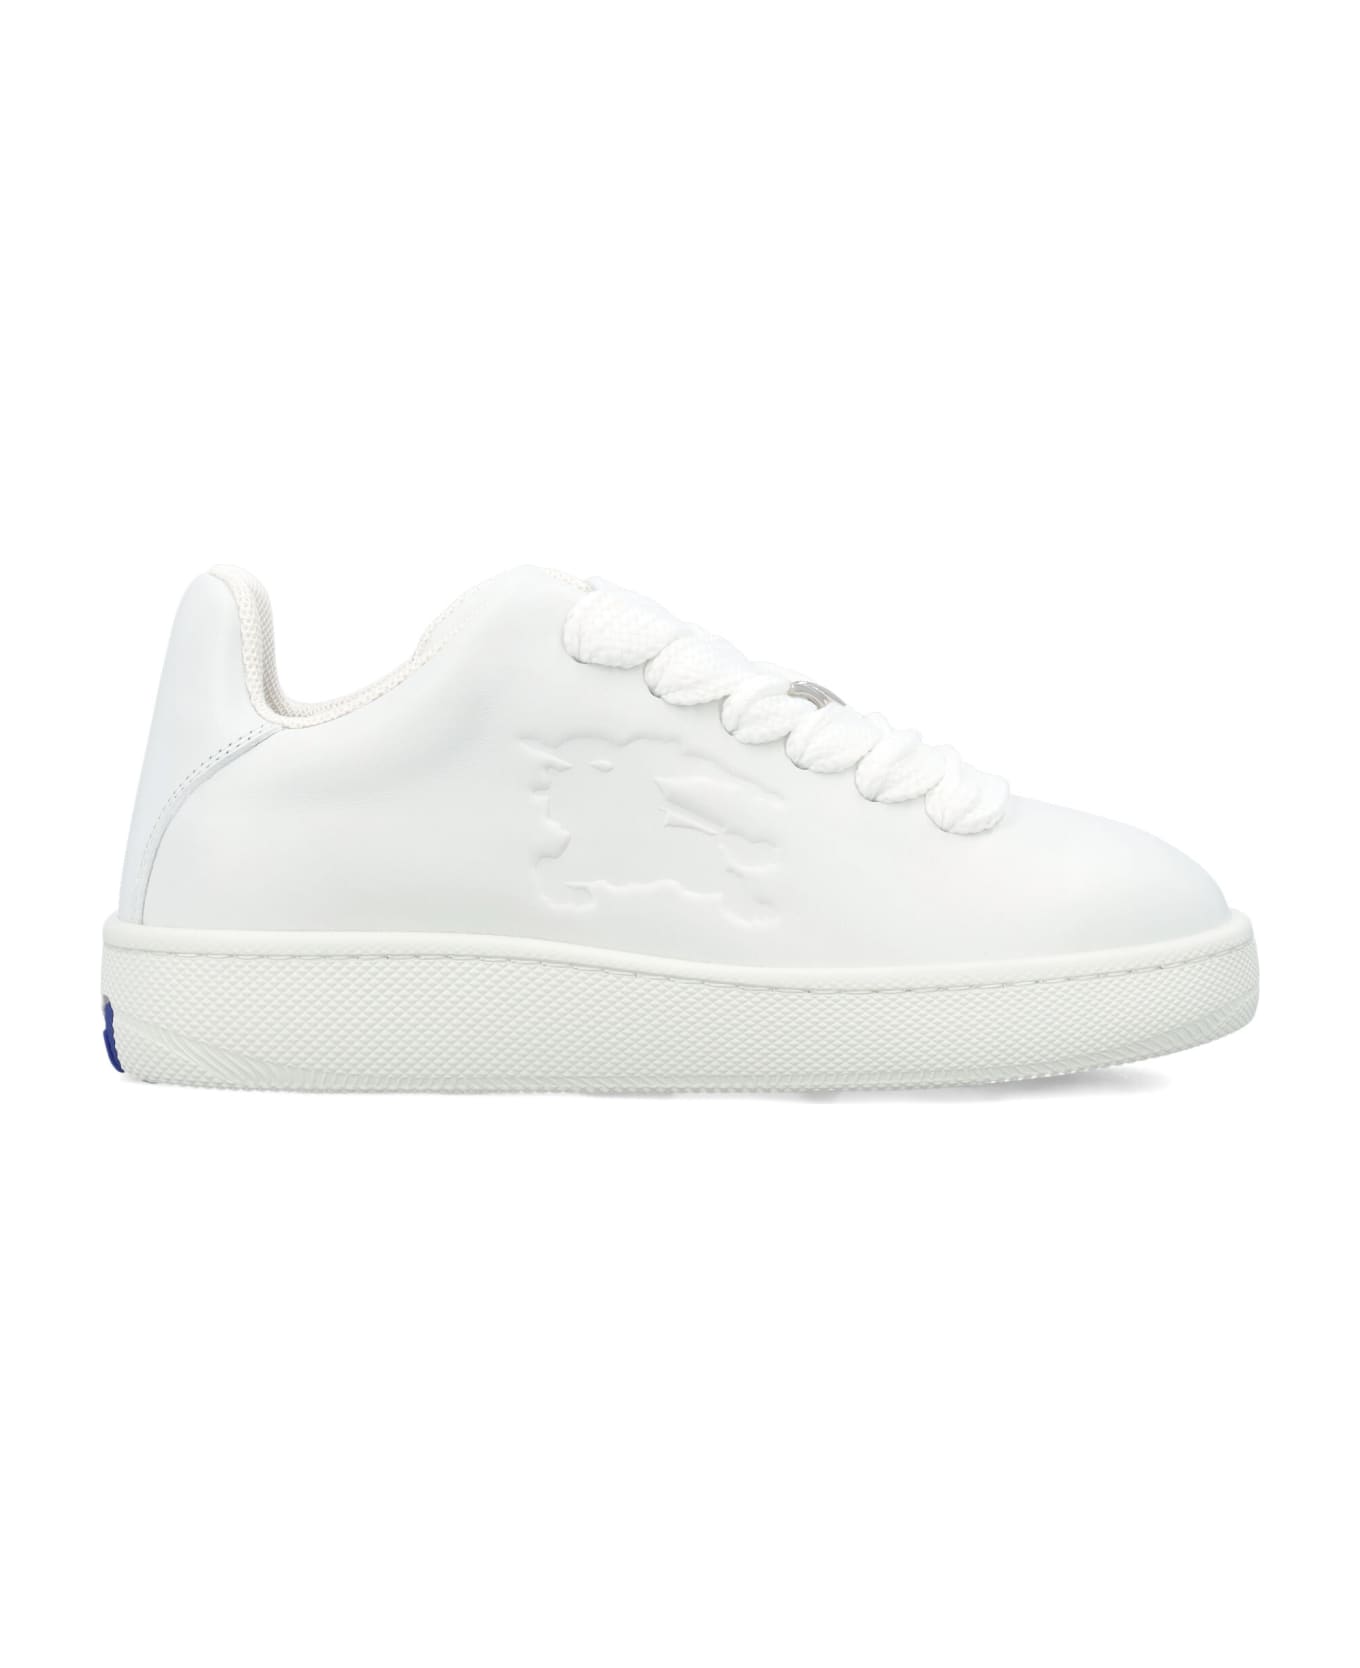 Burberry London Leather Box Sneakers - WHITE